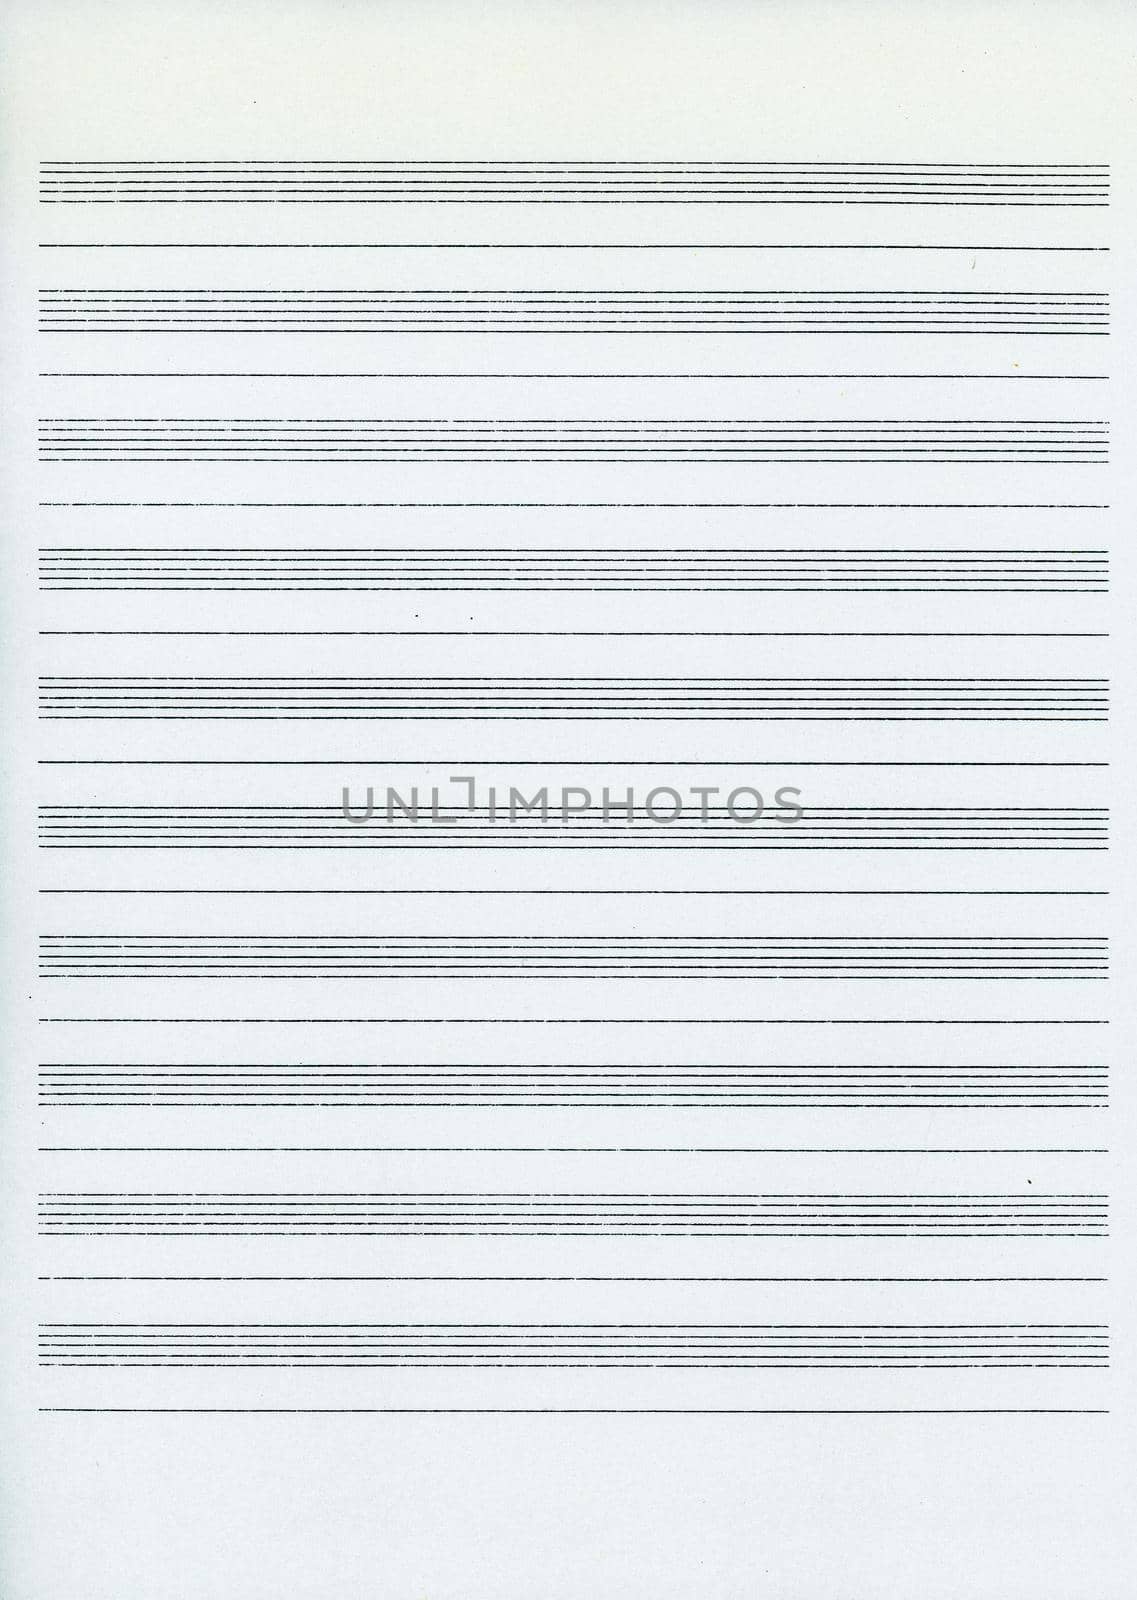 staff paper for music notation by claudiodivizia